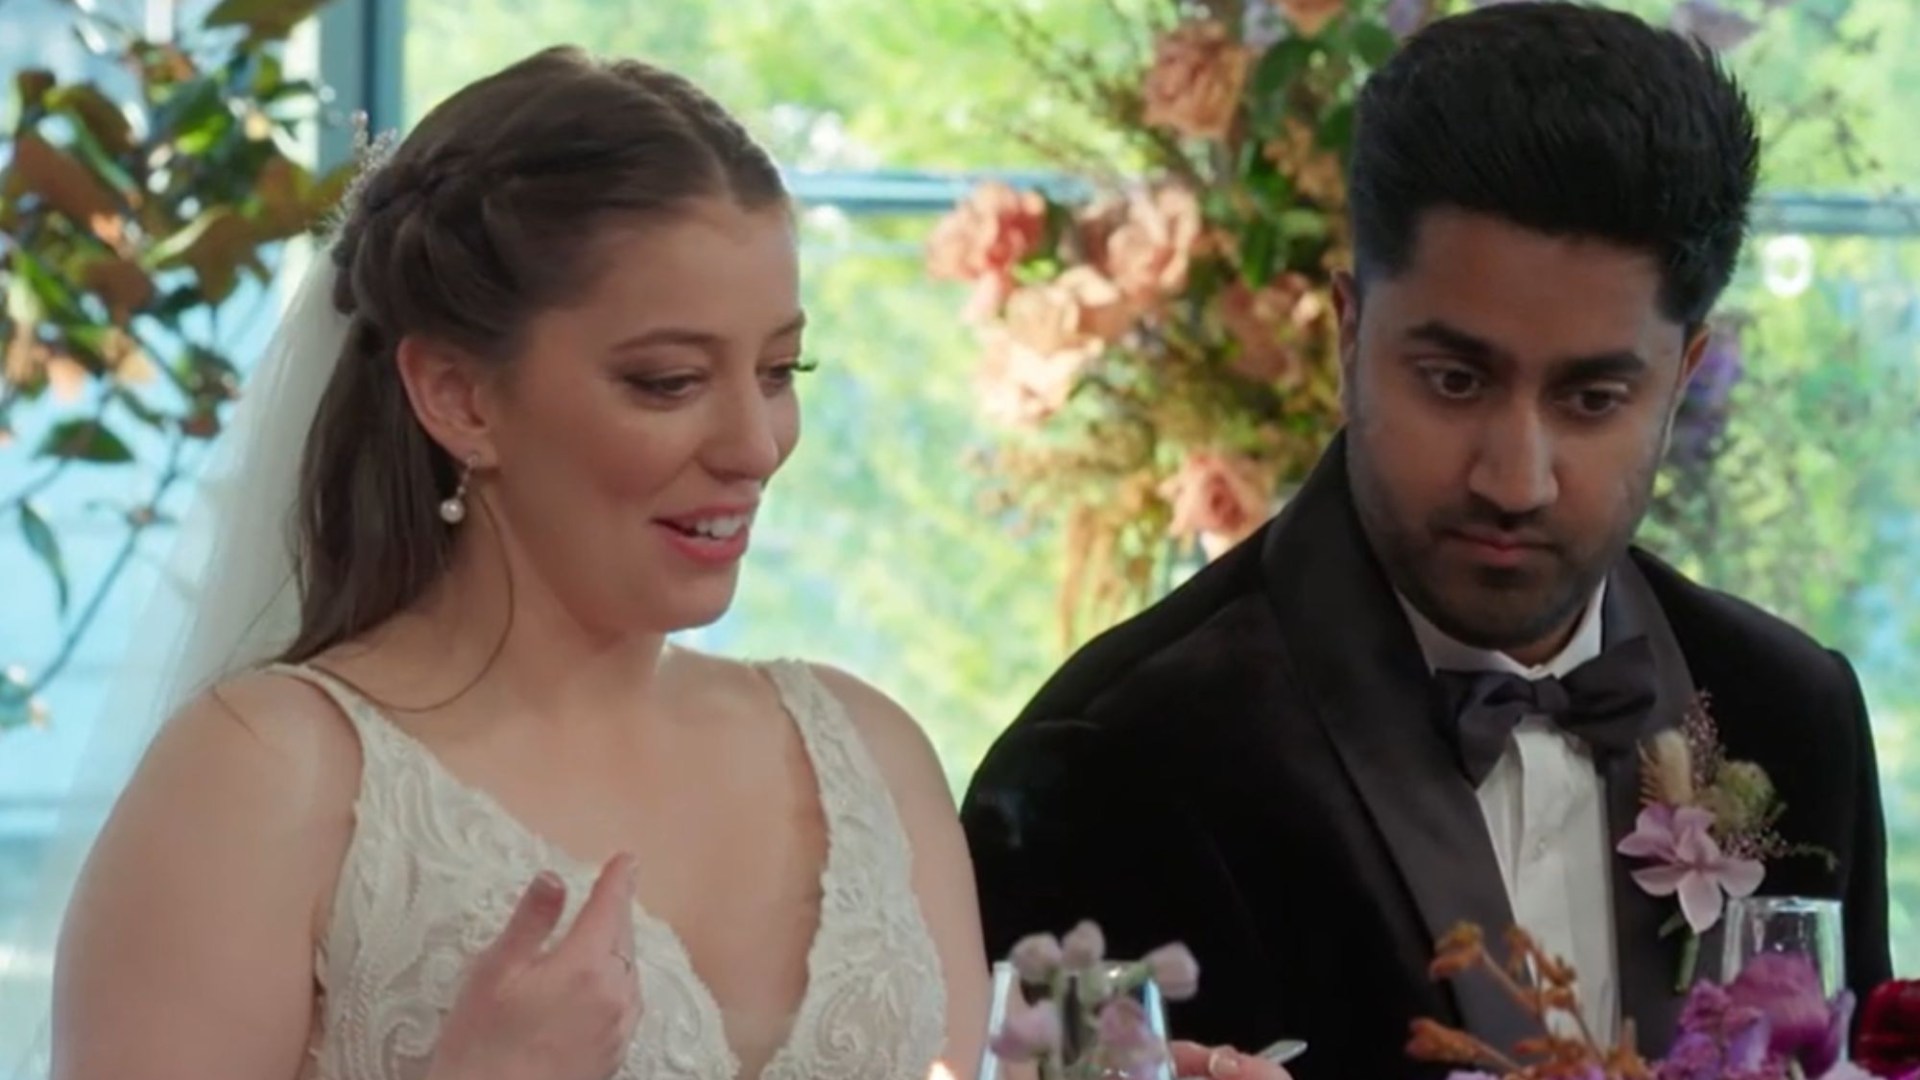 Shocking Injury Strikes Bride on the Way to Wedding – Chaos Ensues on Married at First Sight Australia